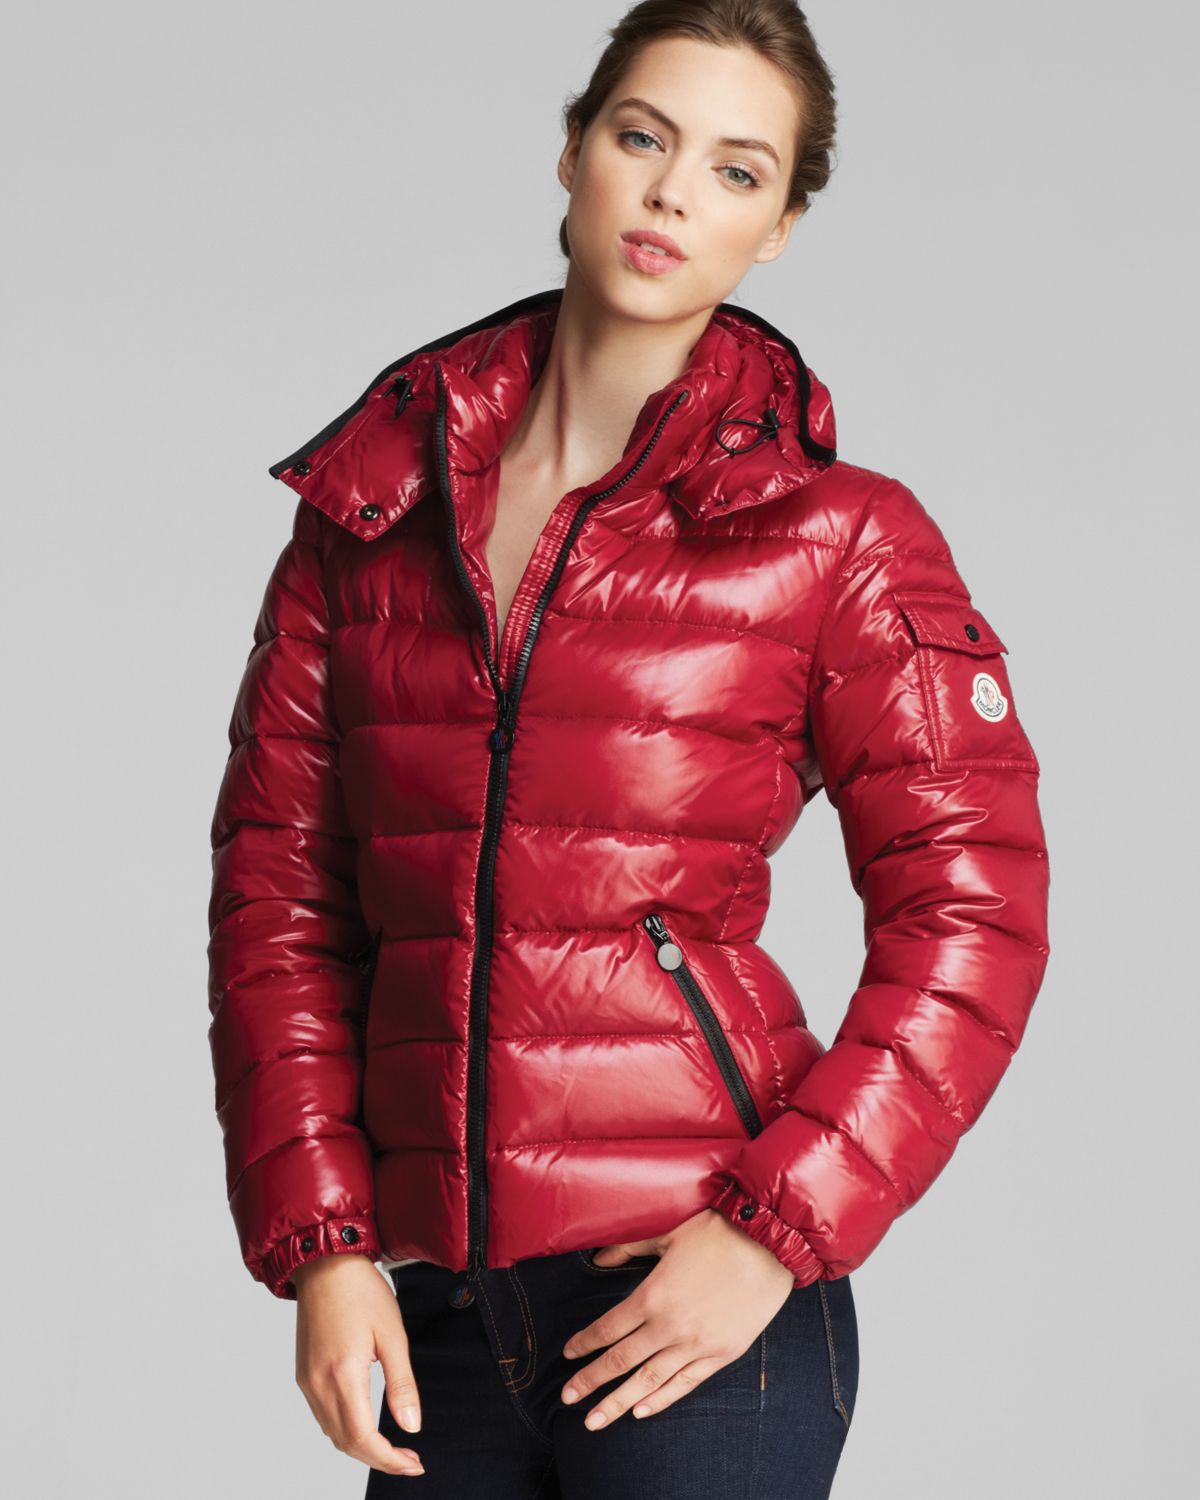 Lyst - Moncler Bady Lacquer Hooded Short Down Coat in Red